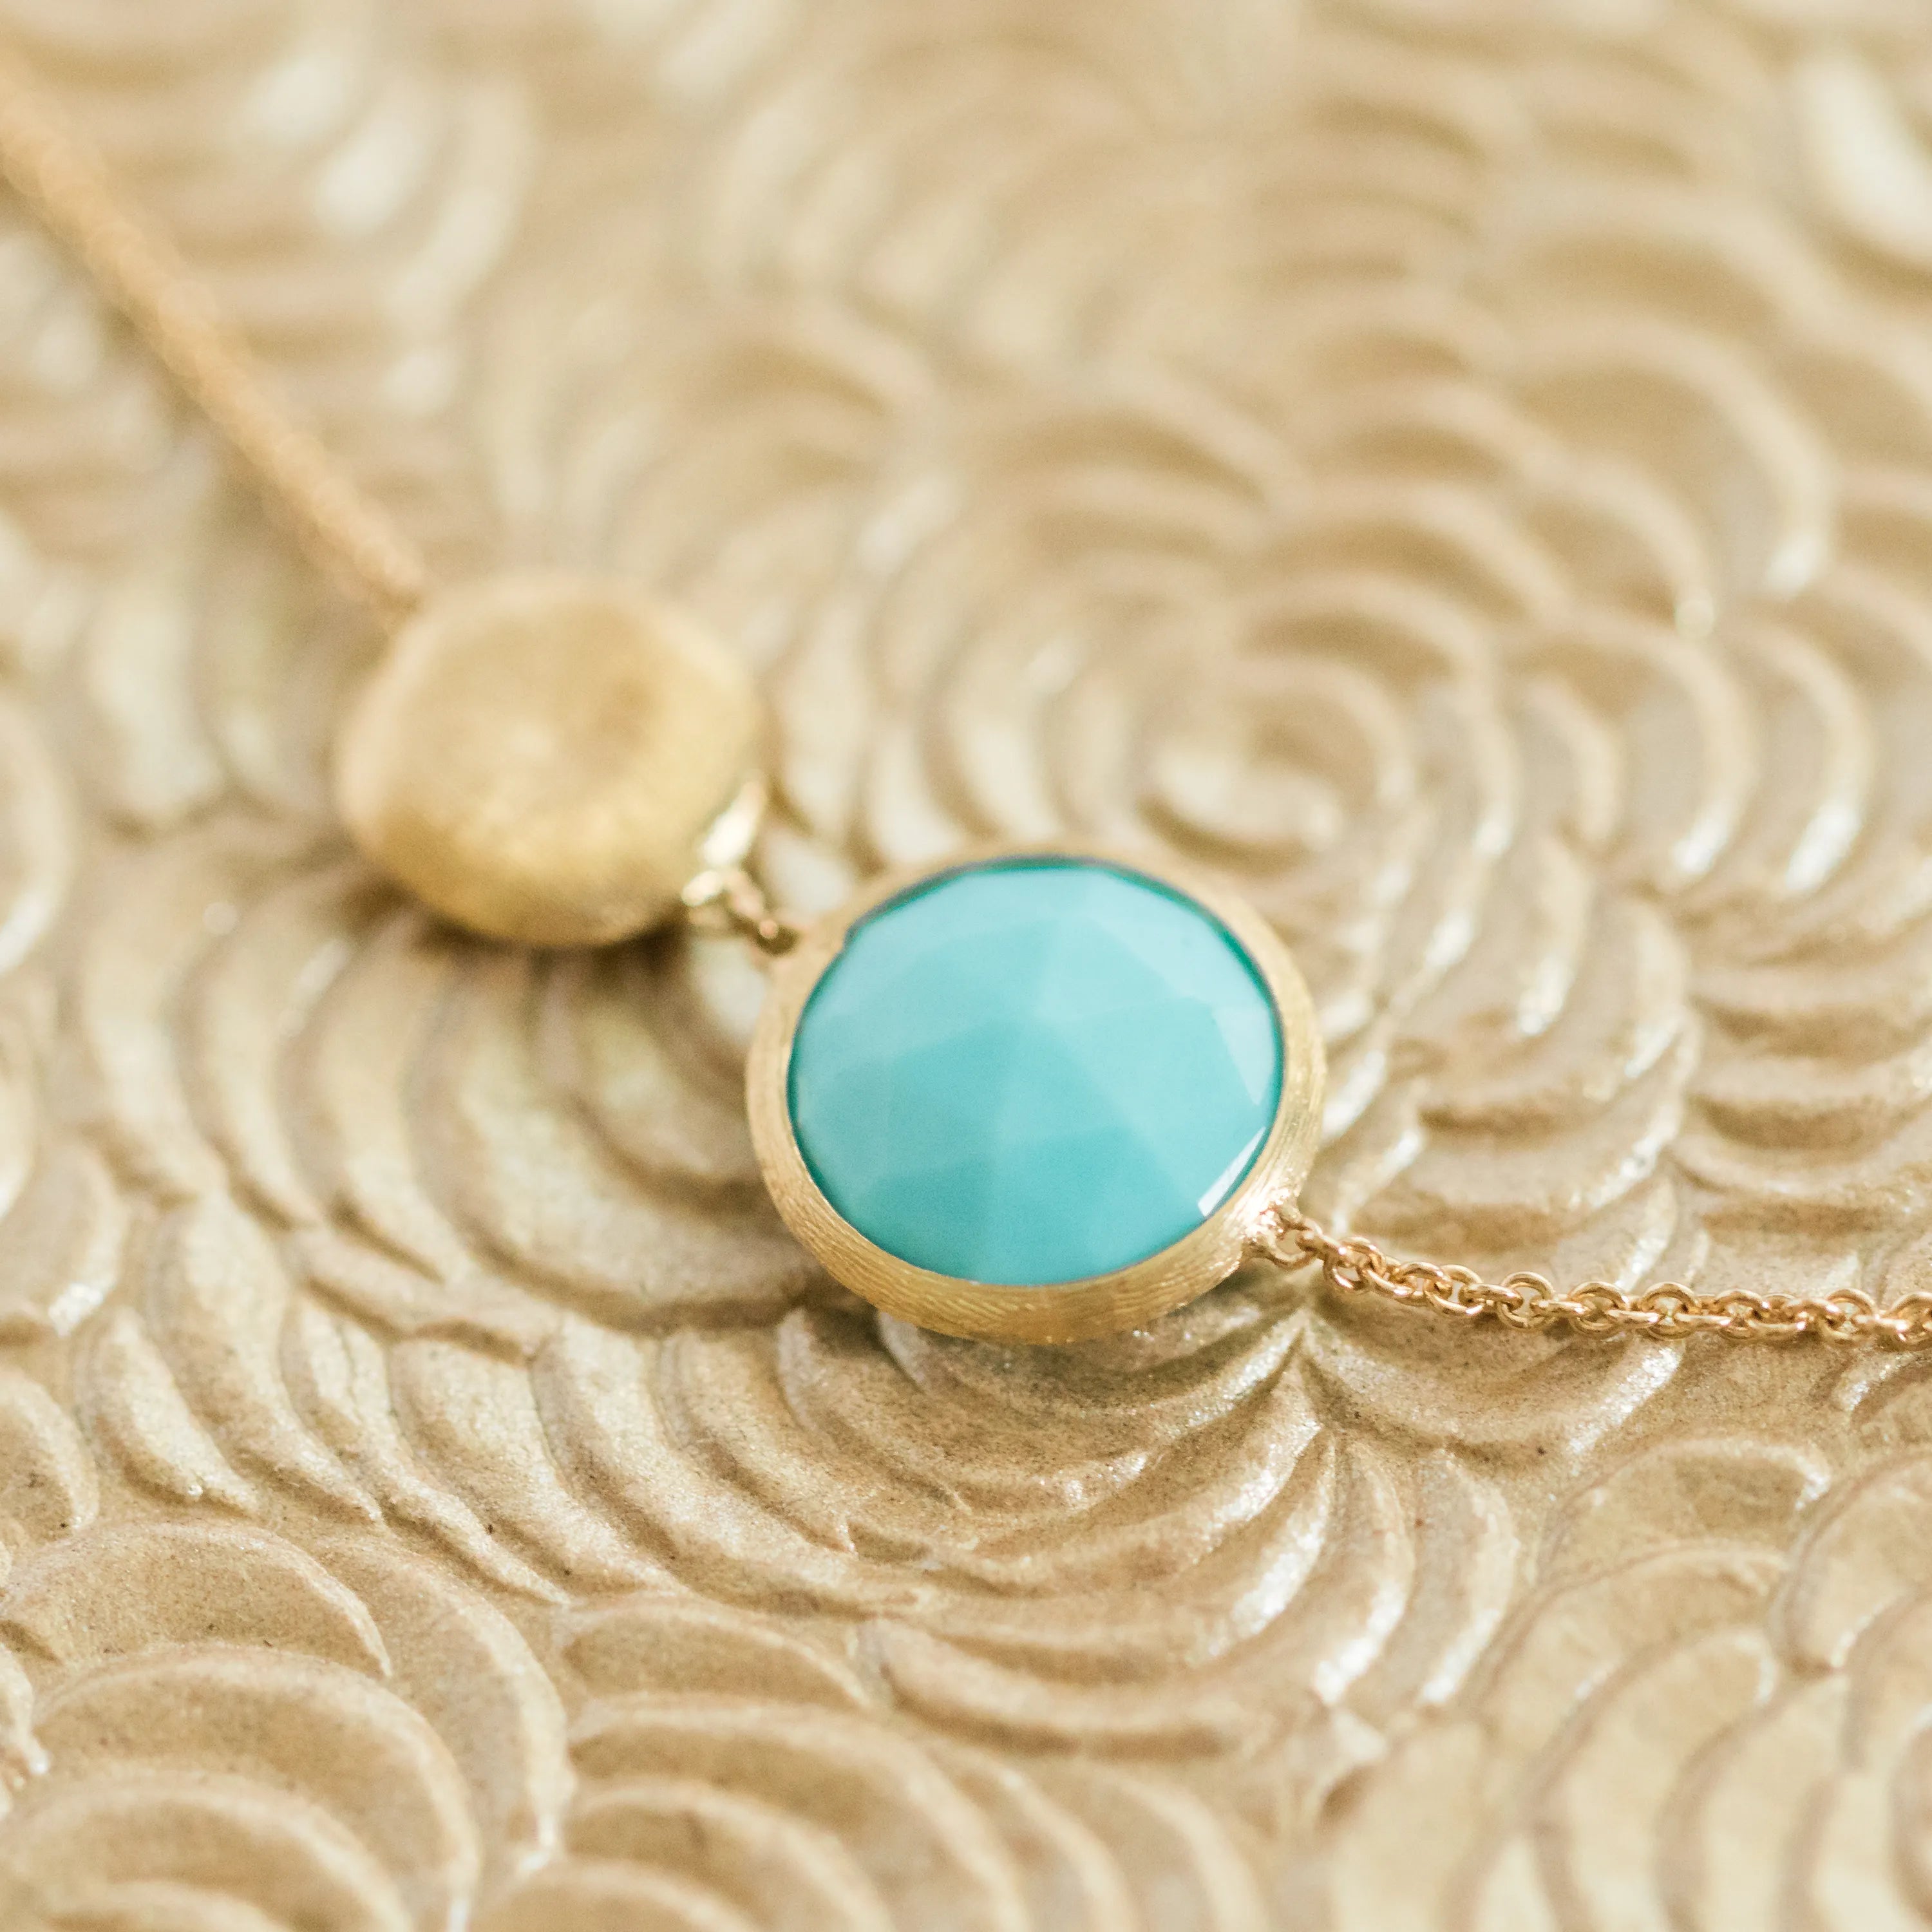 What's On Trend? This Year It's Turquoise